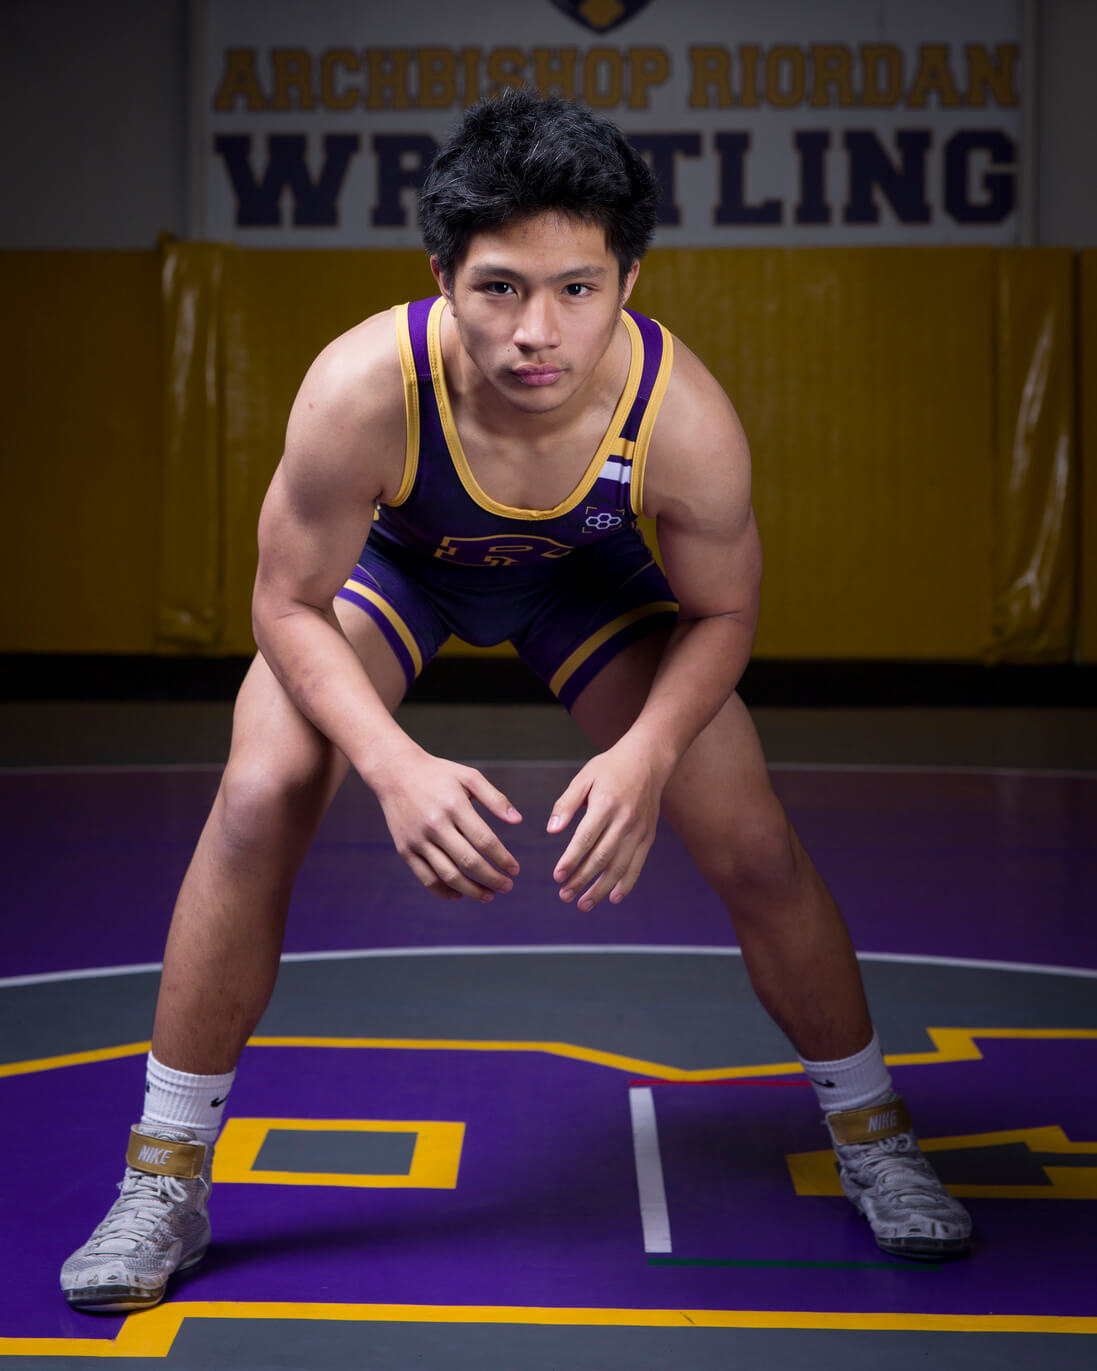 Wrestling portraits and team photos for middle school and high school athletes